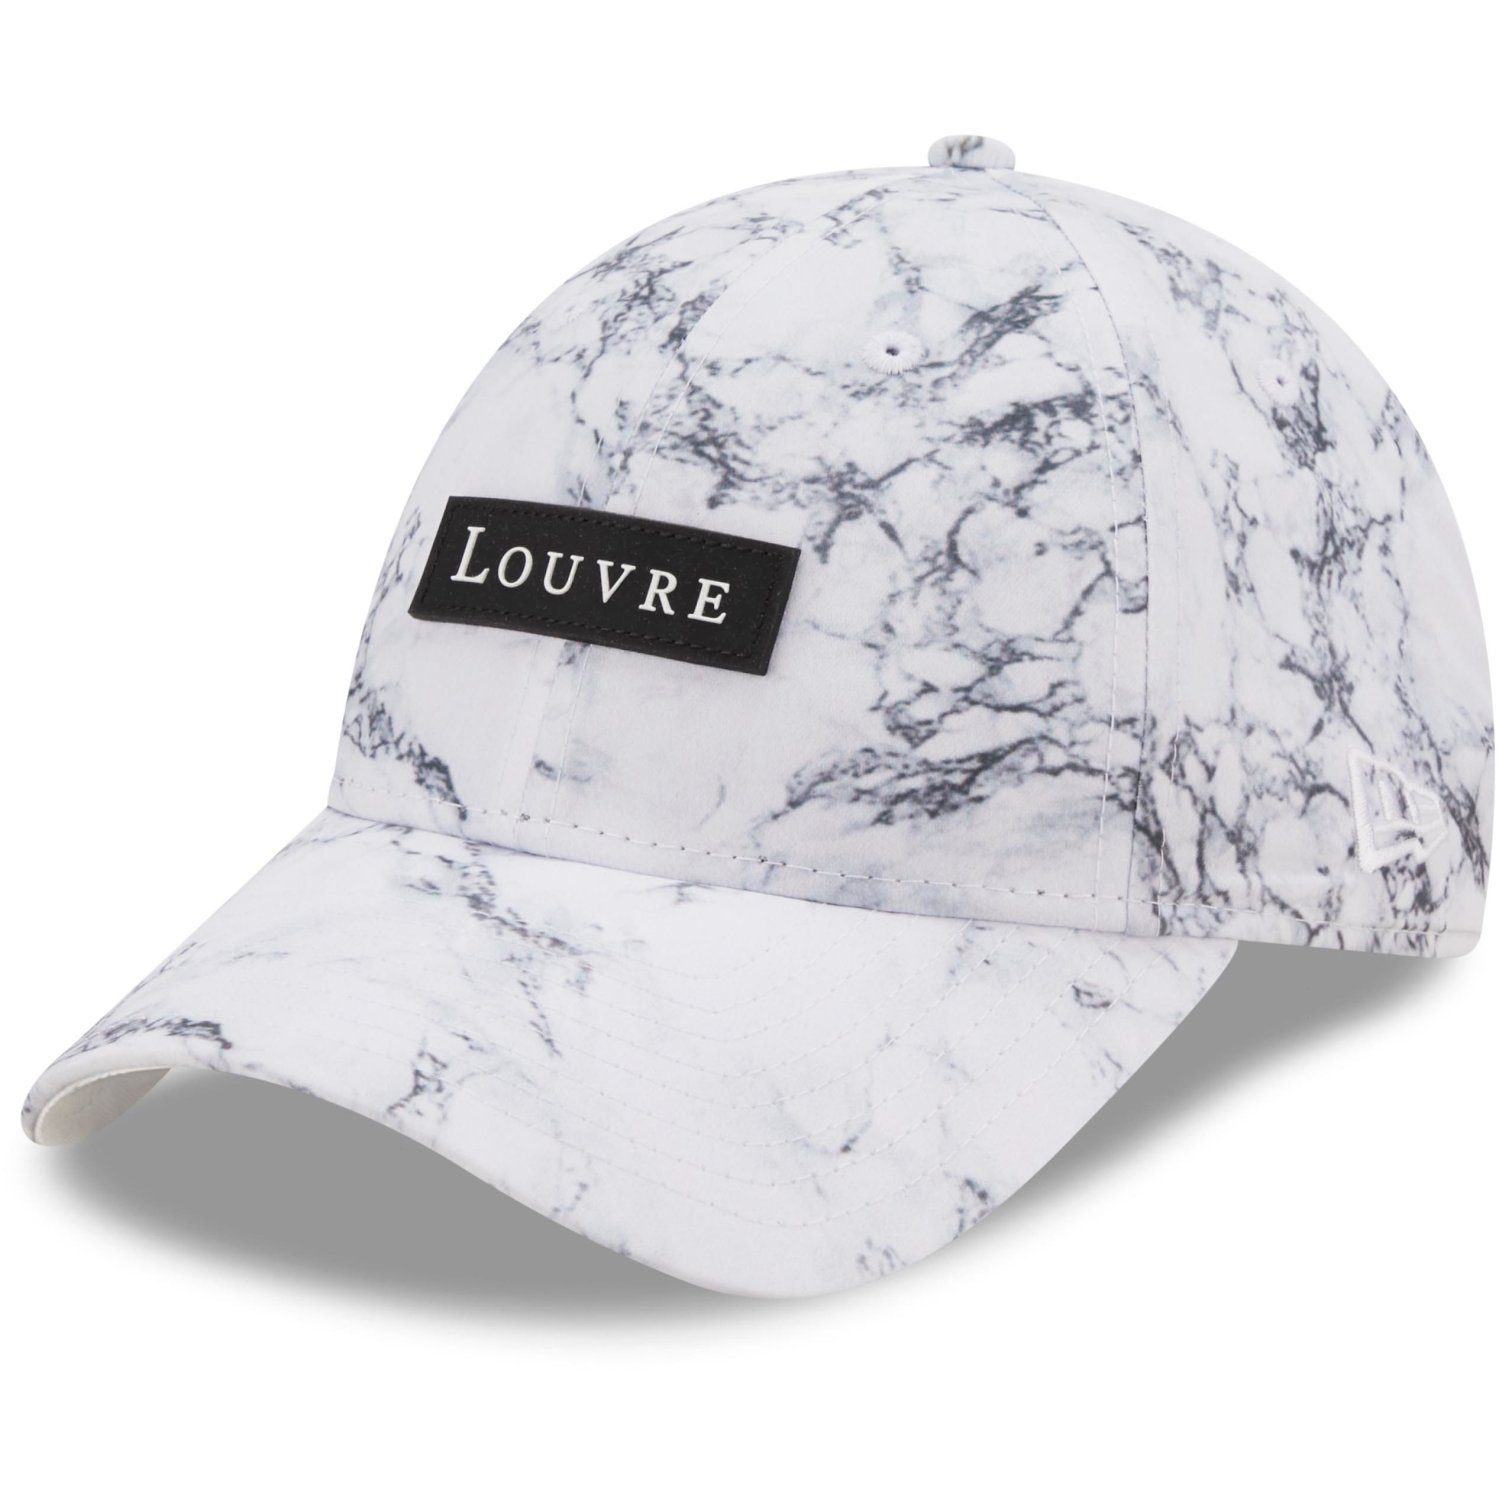 New Era Trucker Cap 9Forty Strapback LOUVRE MARBLE all over